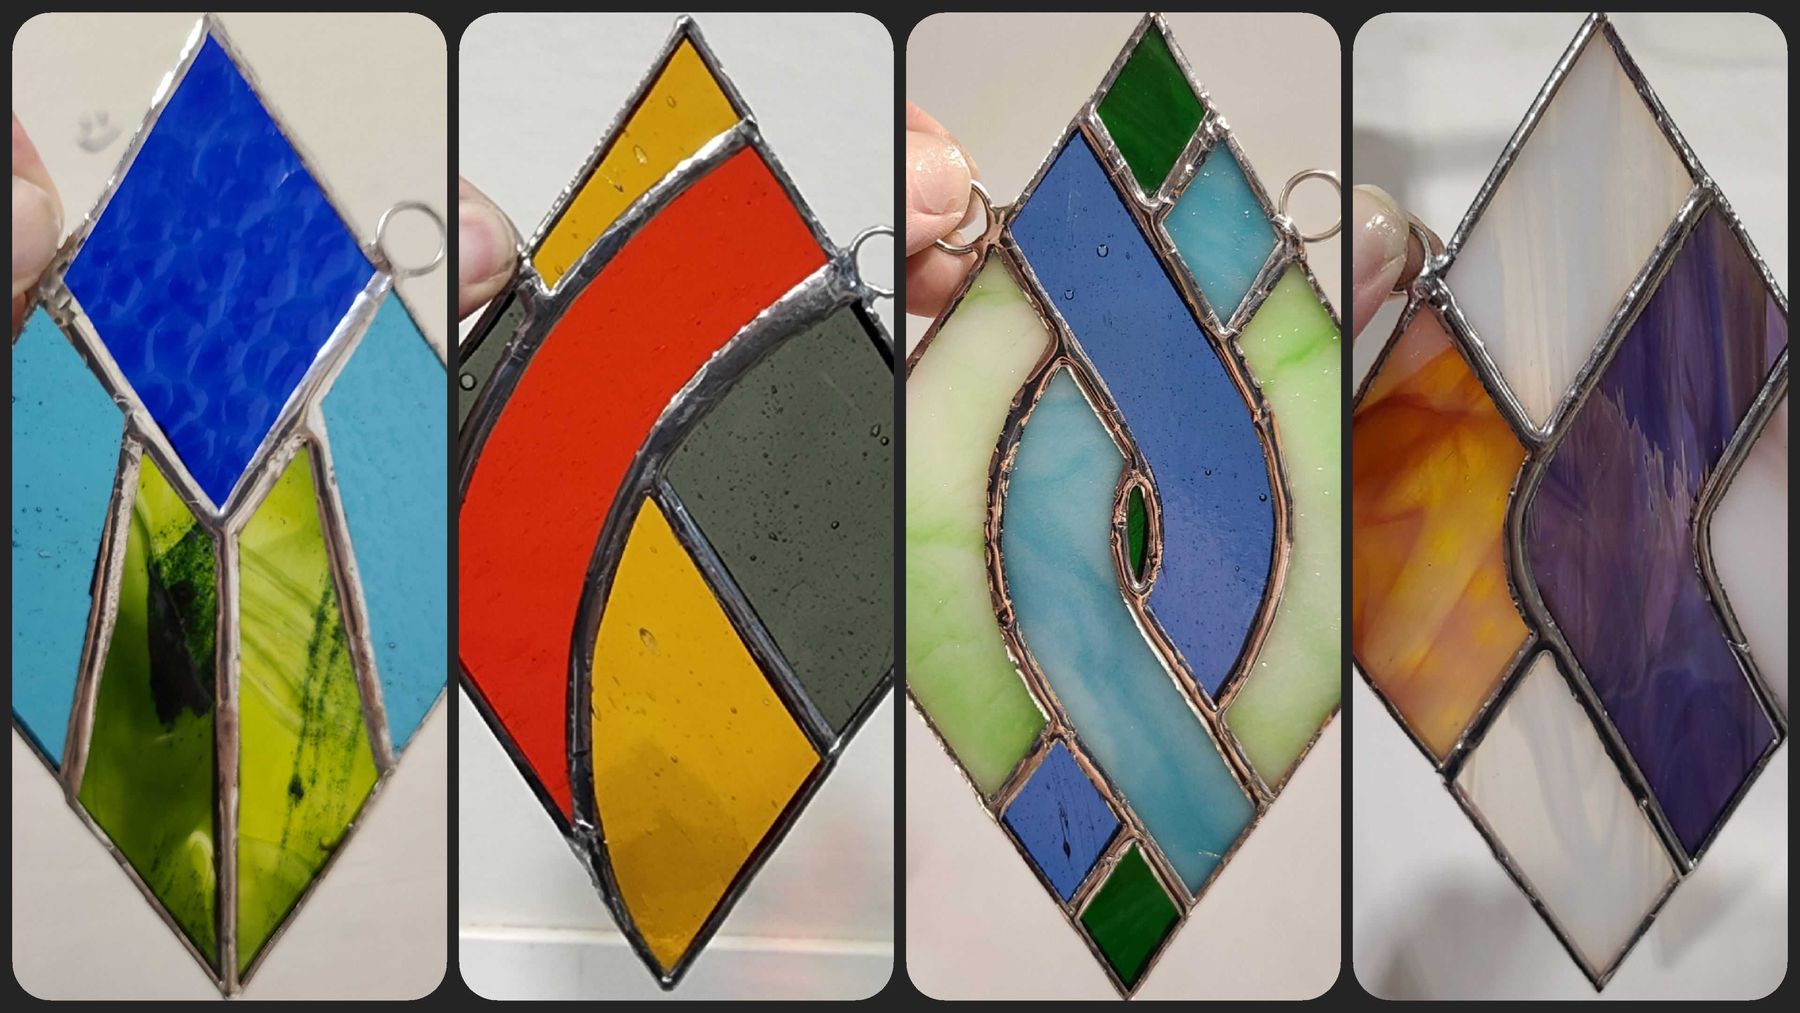 LAW - TinkerMill Intro to Stained Glass- Weekday Series! 9/11, 9/13 and 9/15